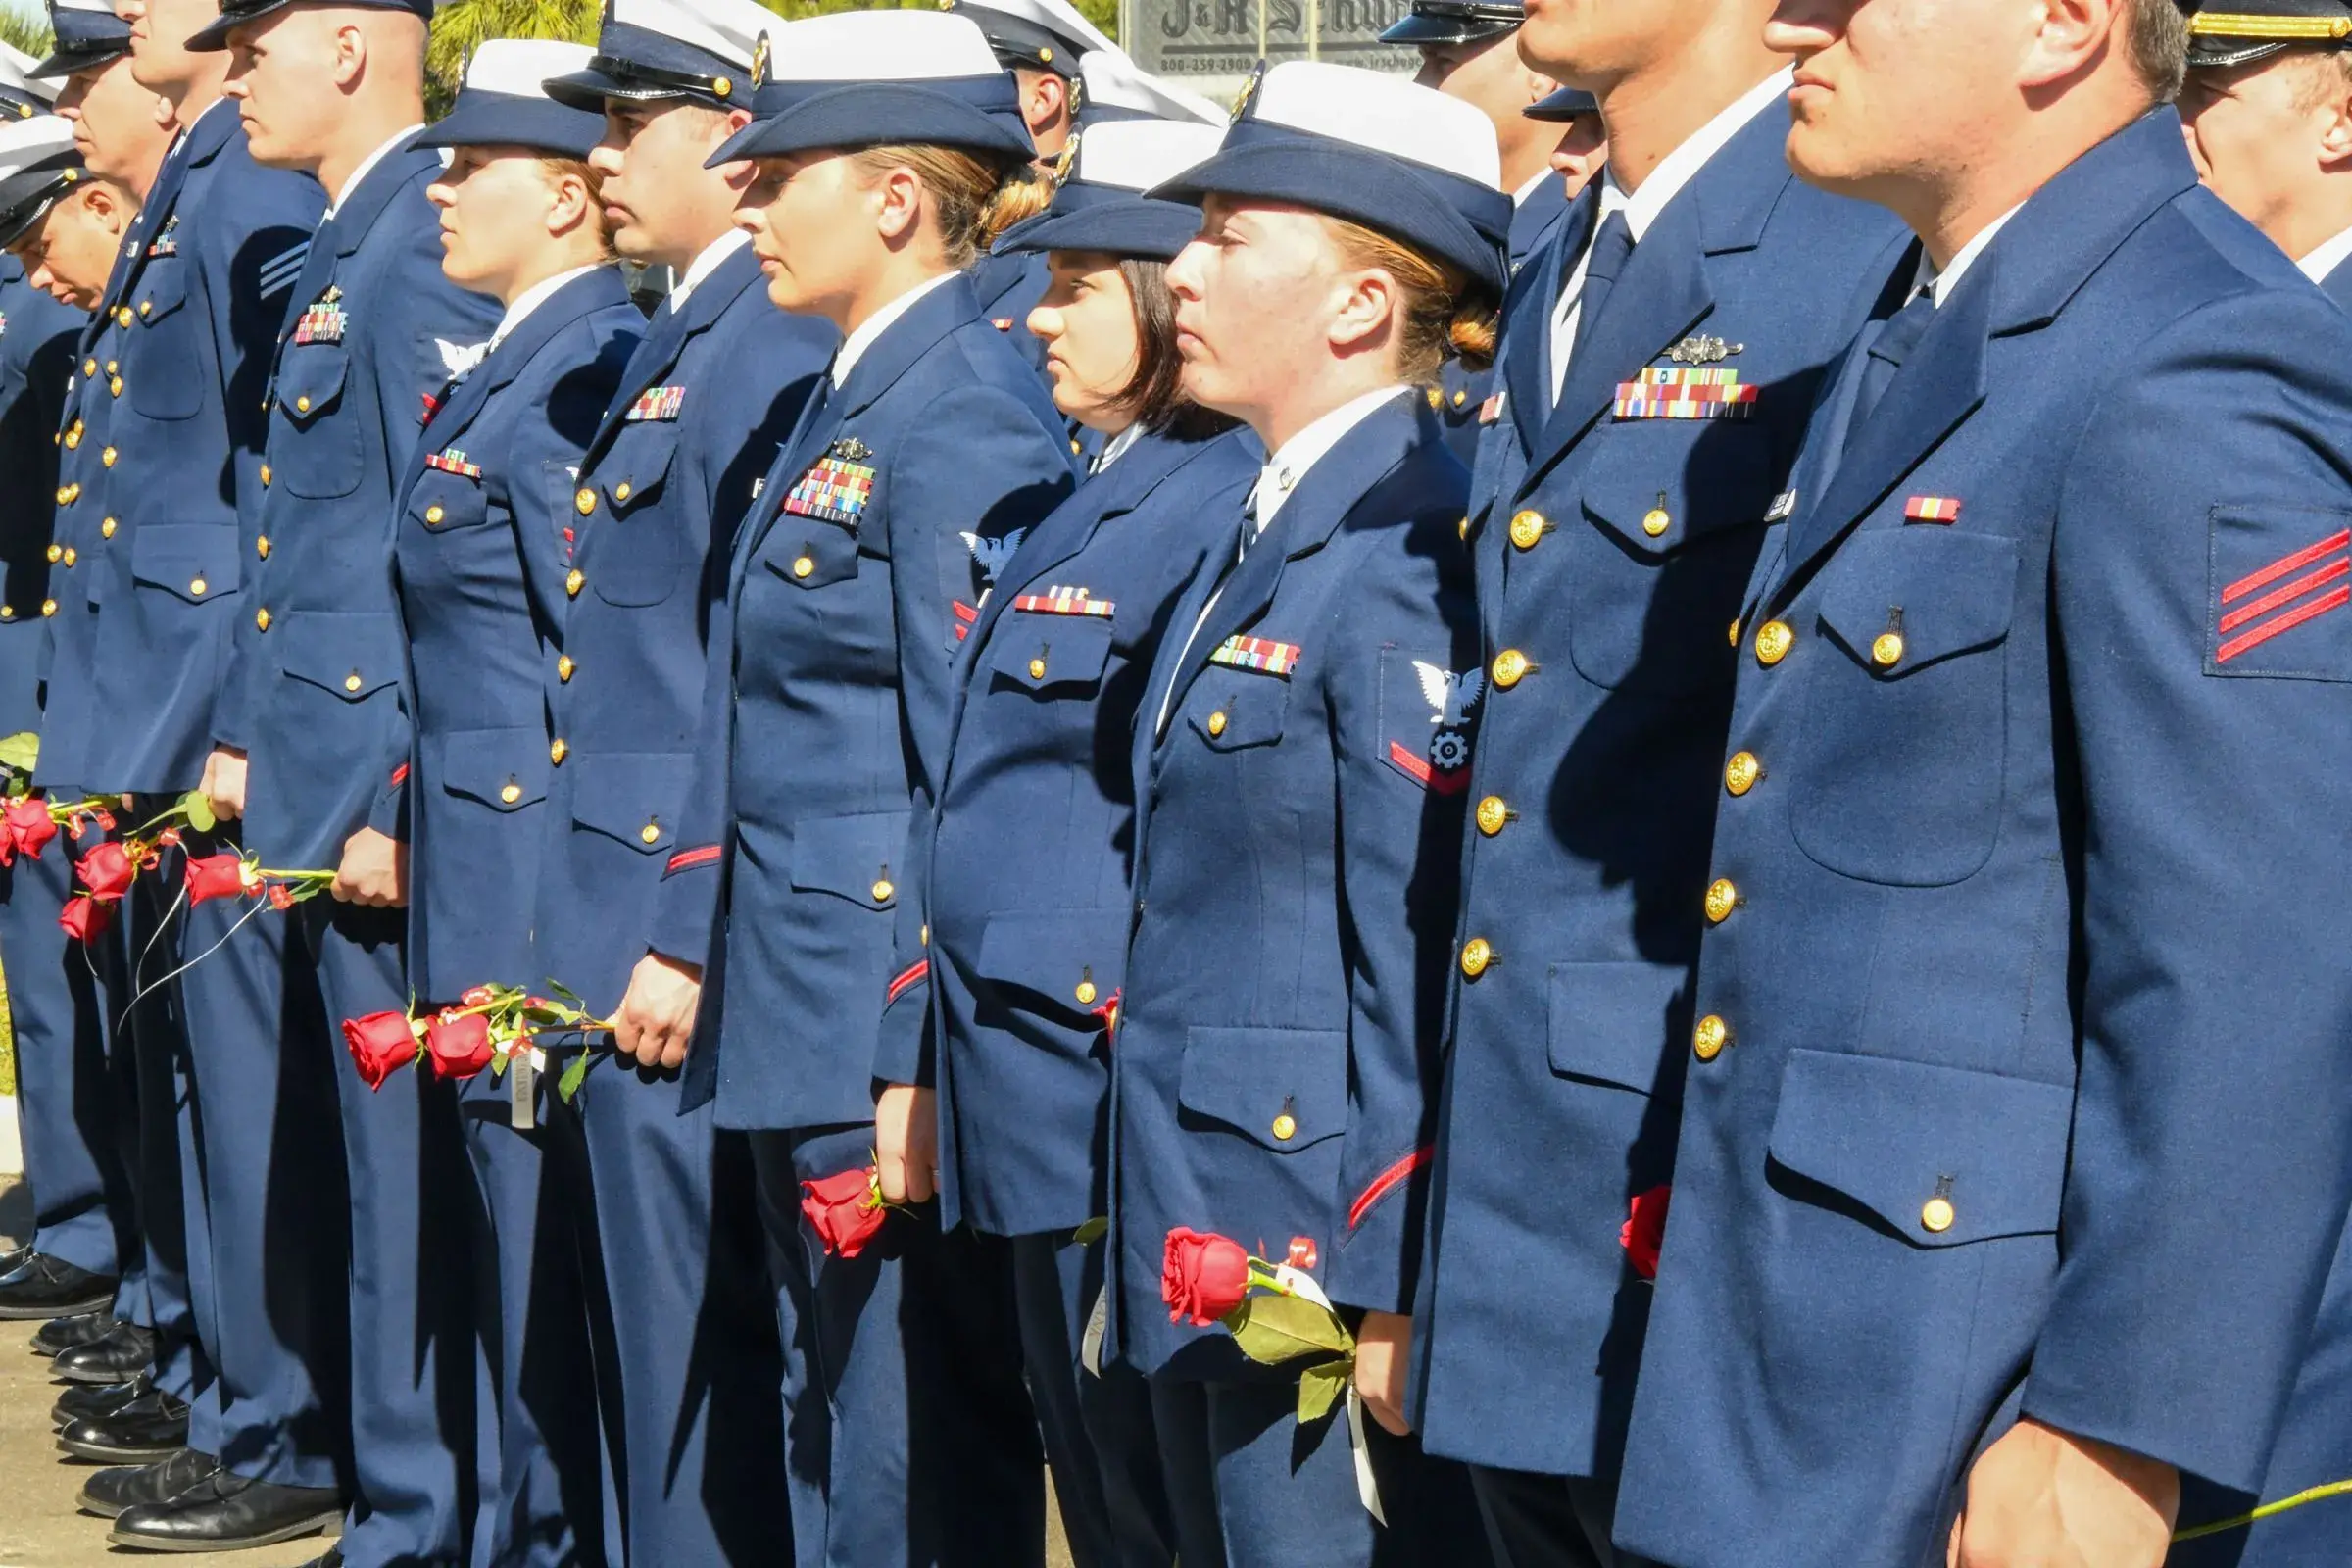 Members of the Coast Guard With Roses